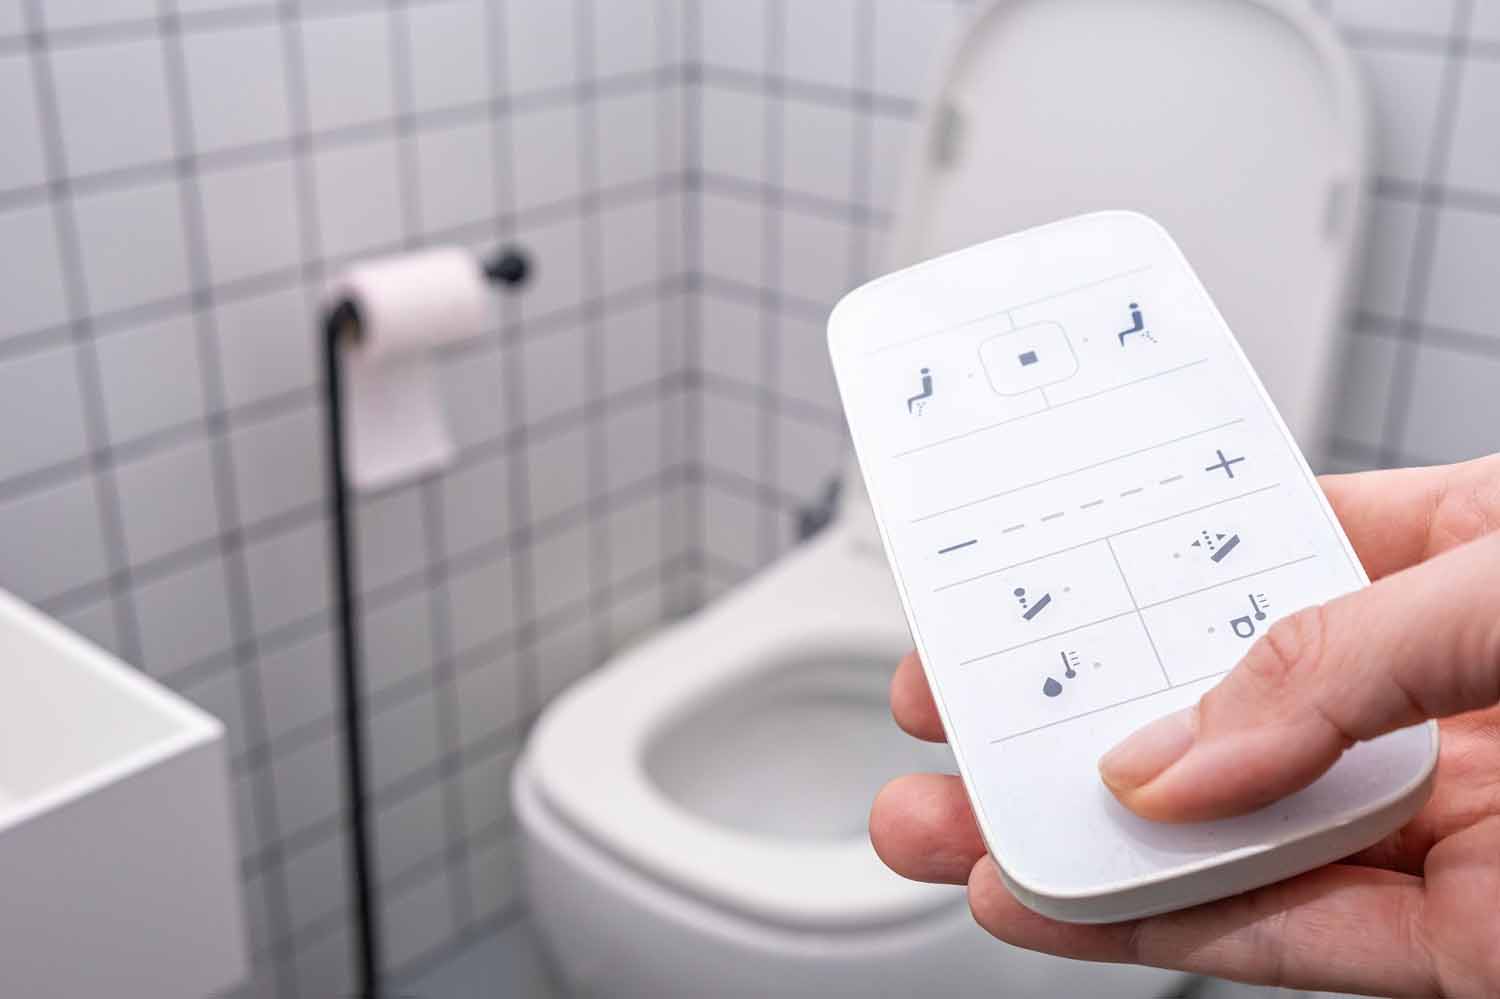 Hand holding remote control with buttons for a smart toilet in the background.